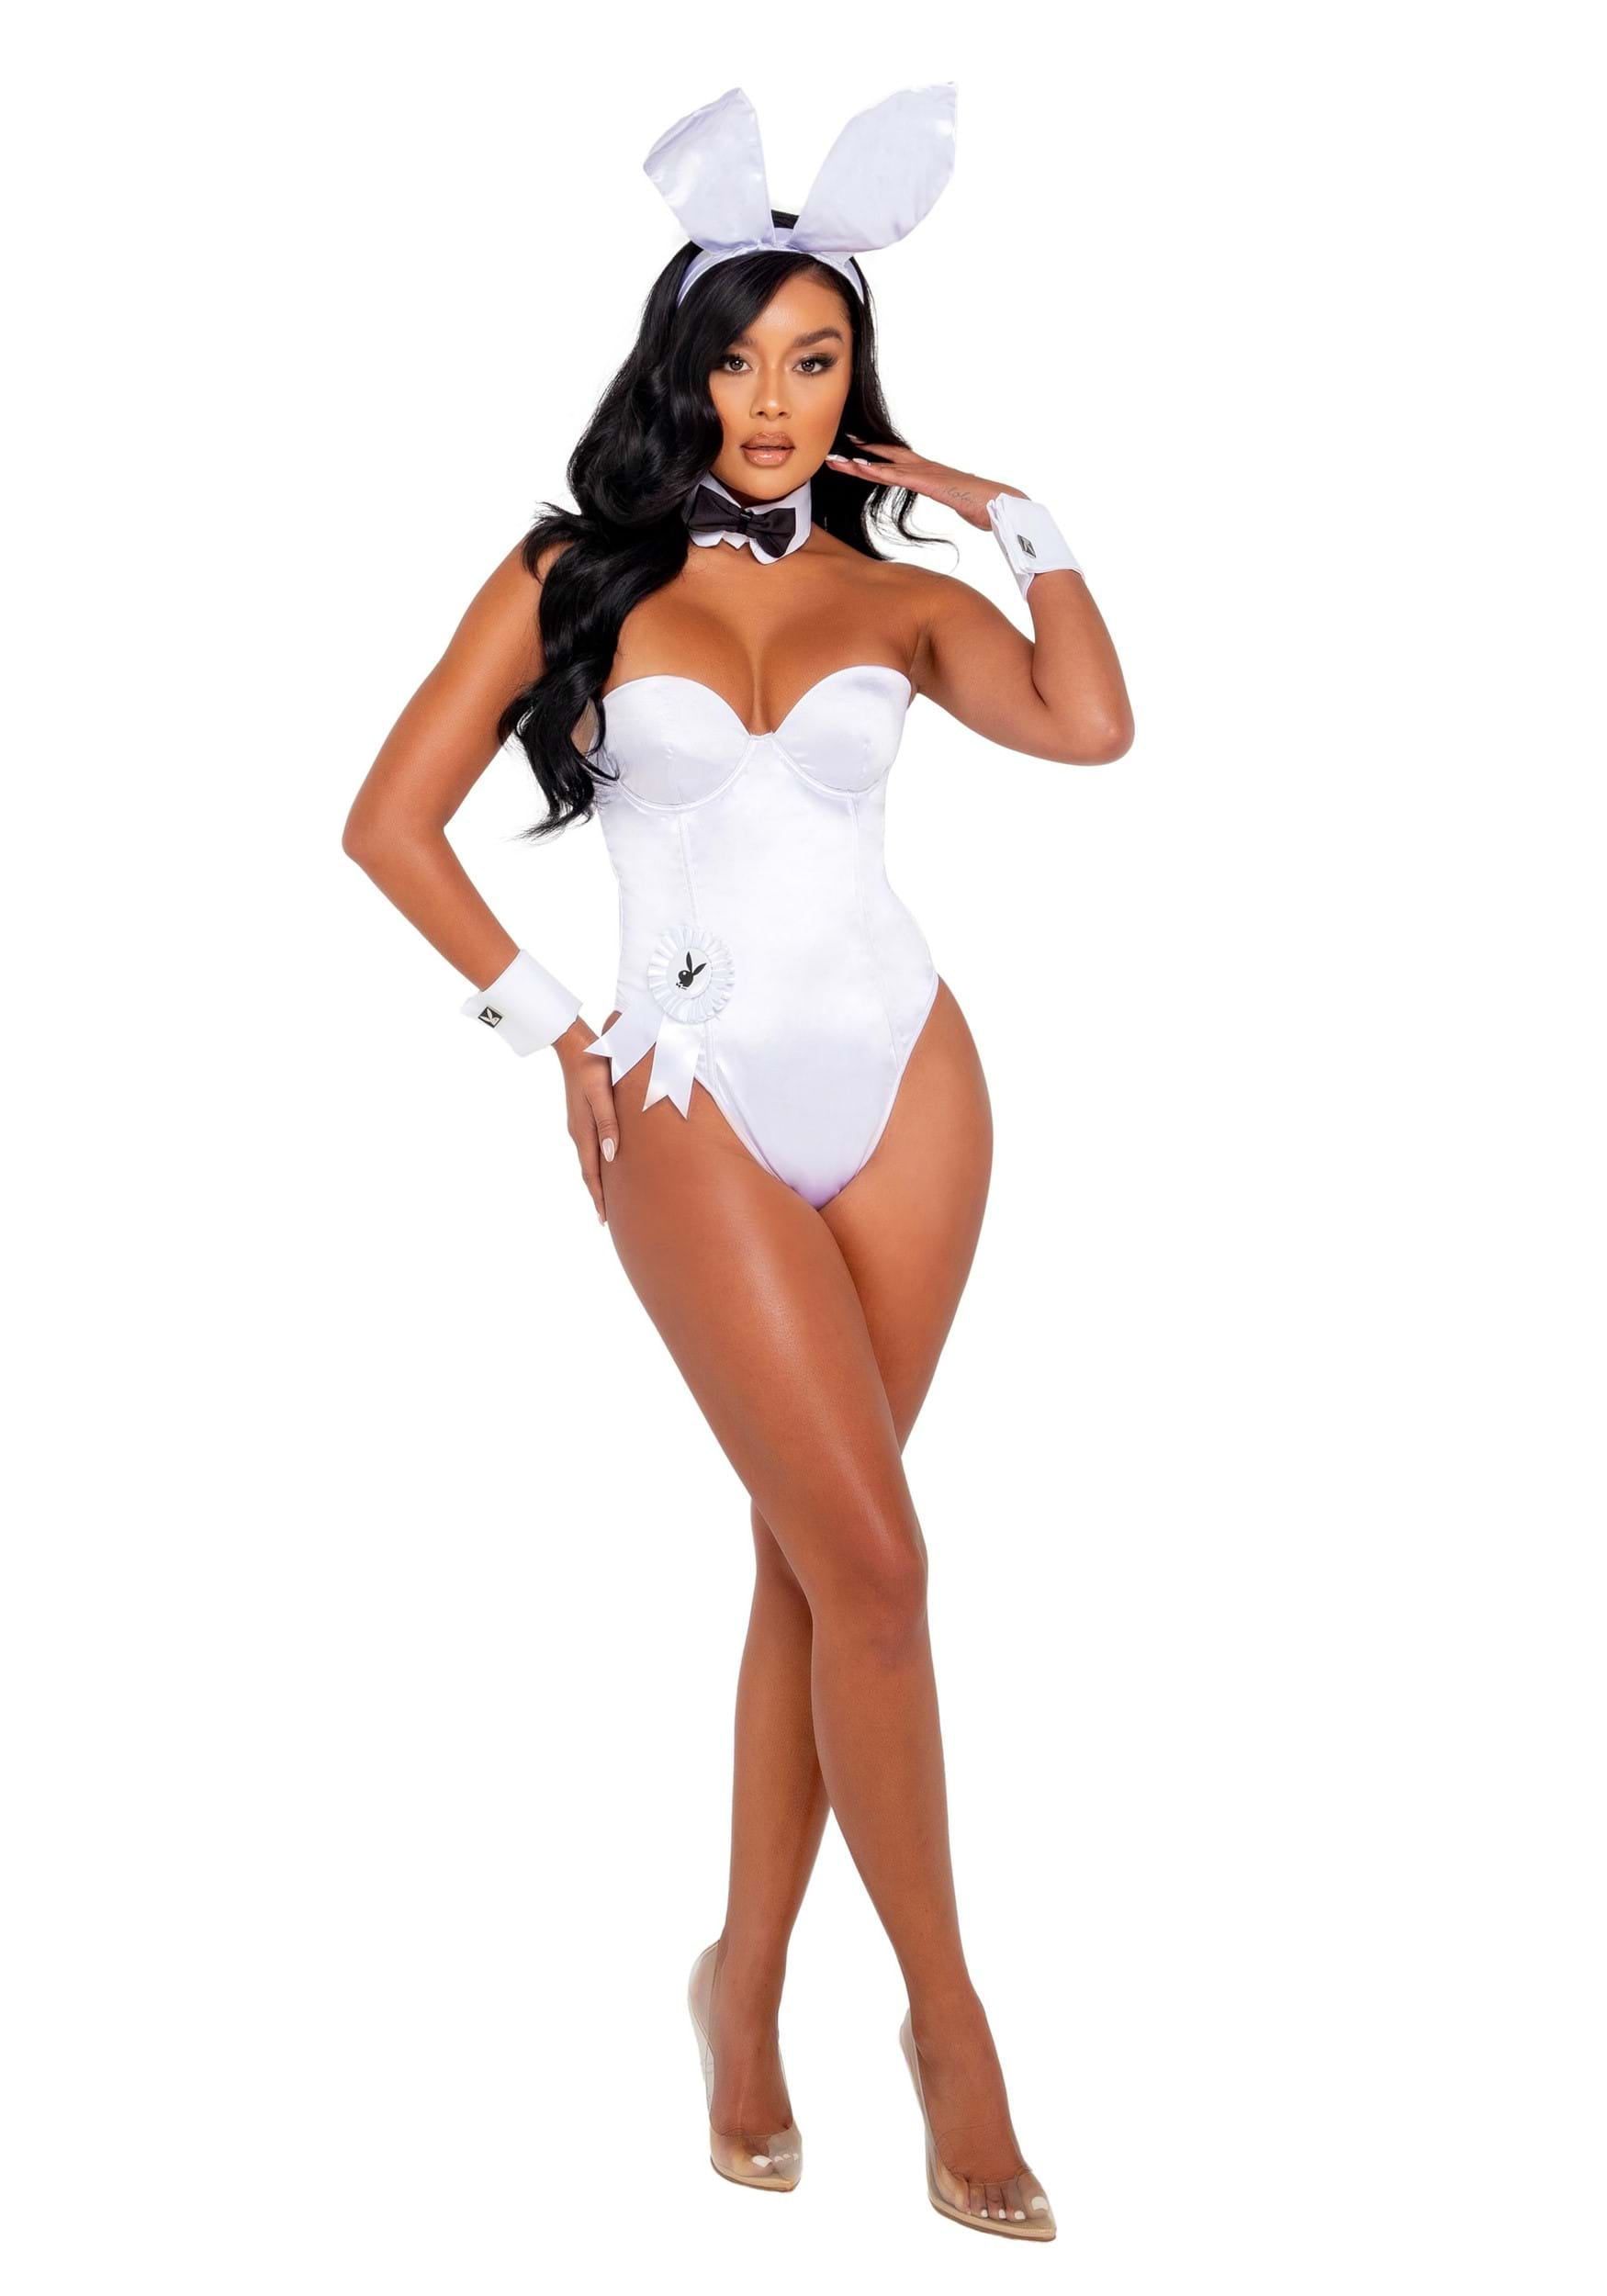 amelita balgos recommends playboy bunny costume ideas pic